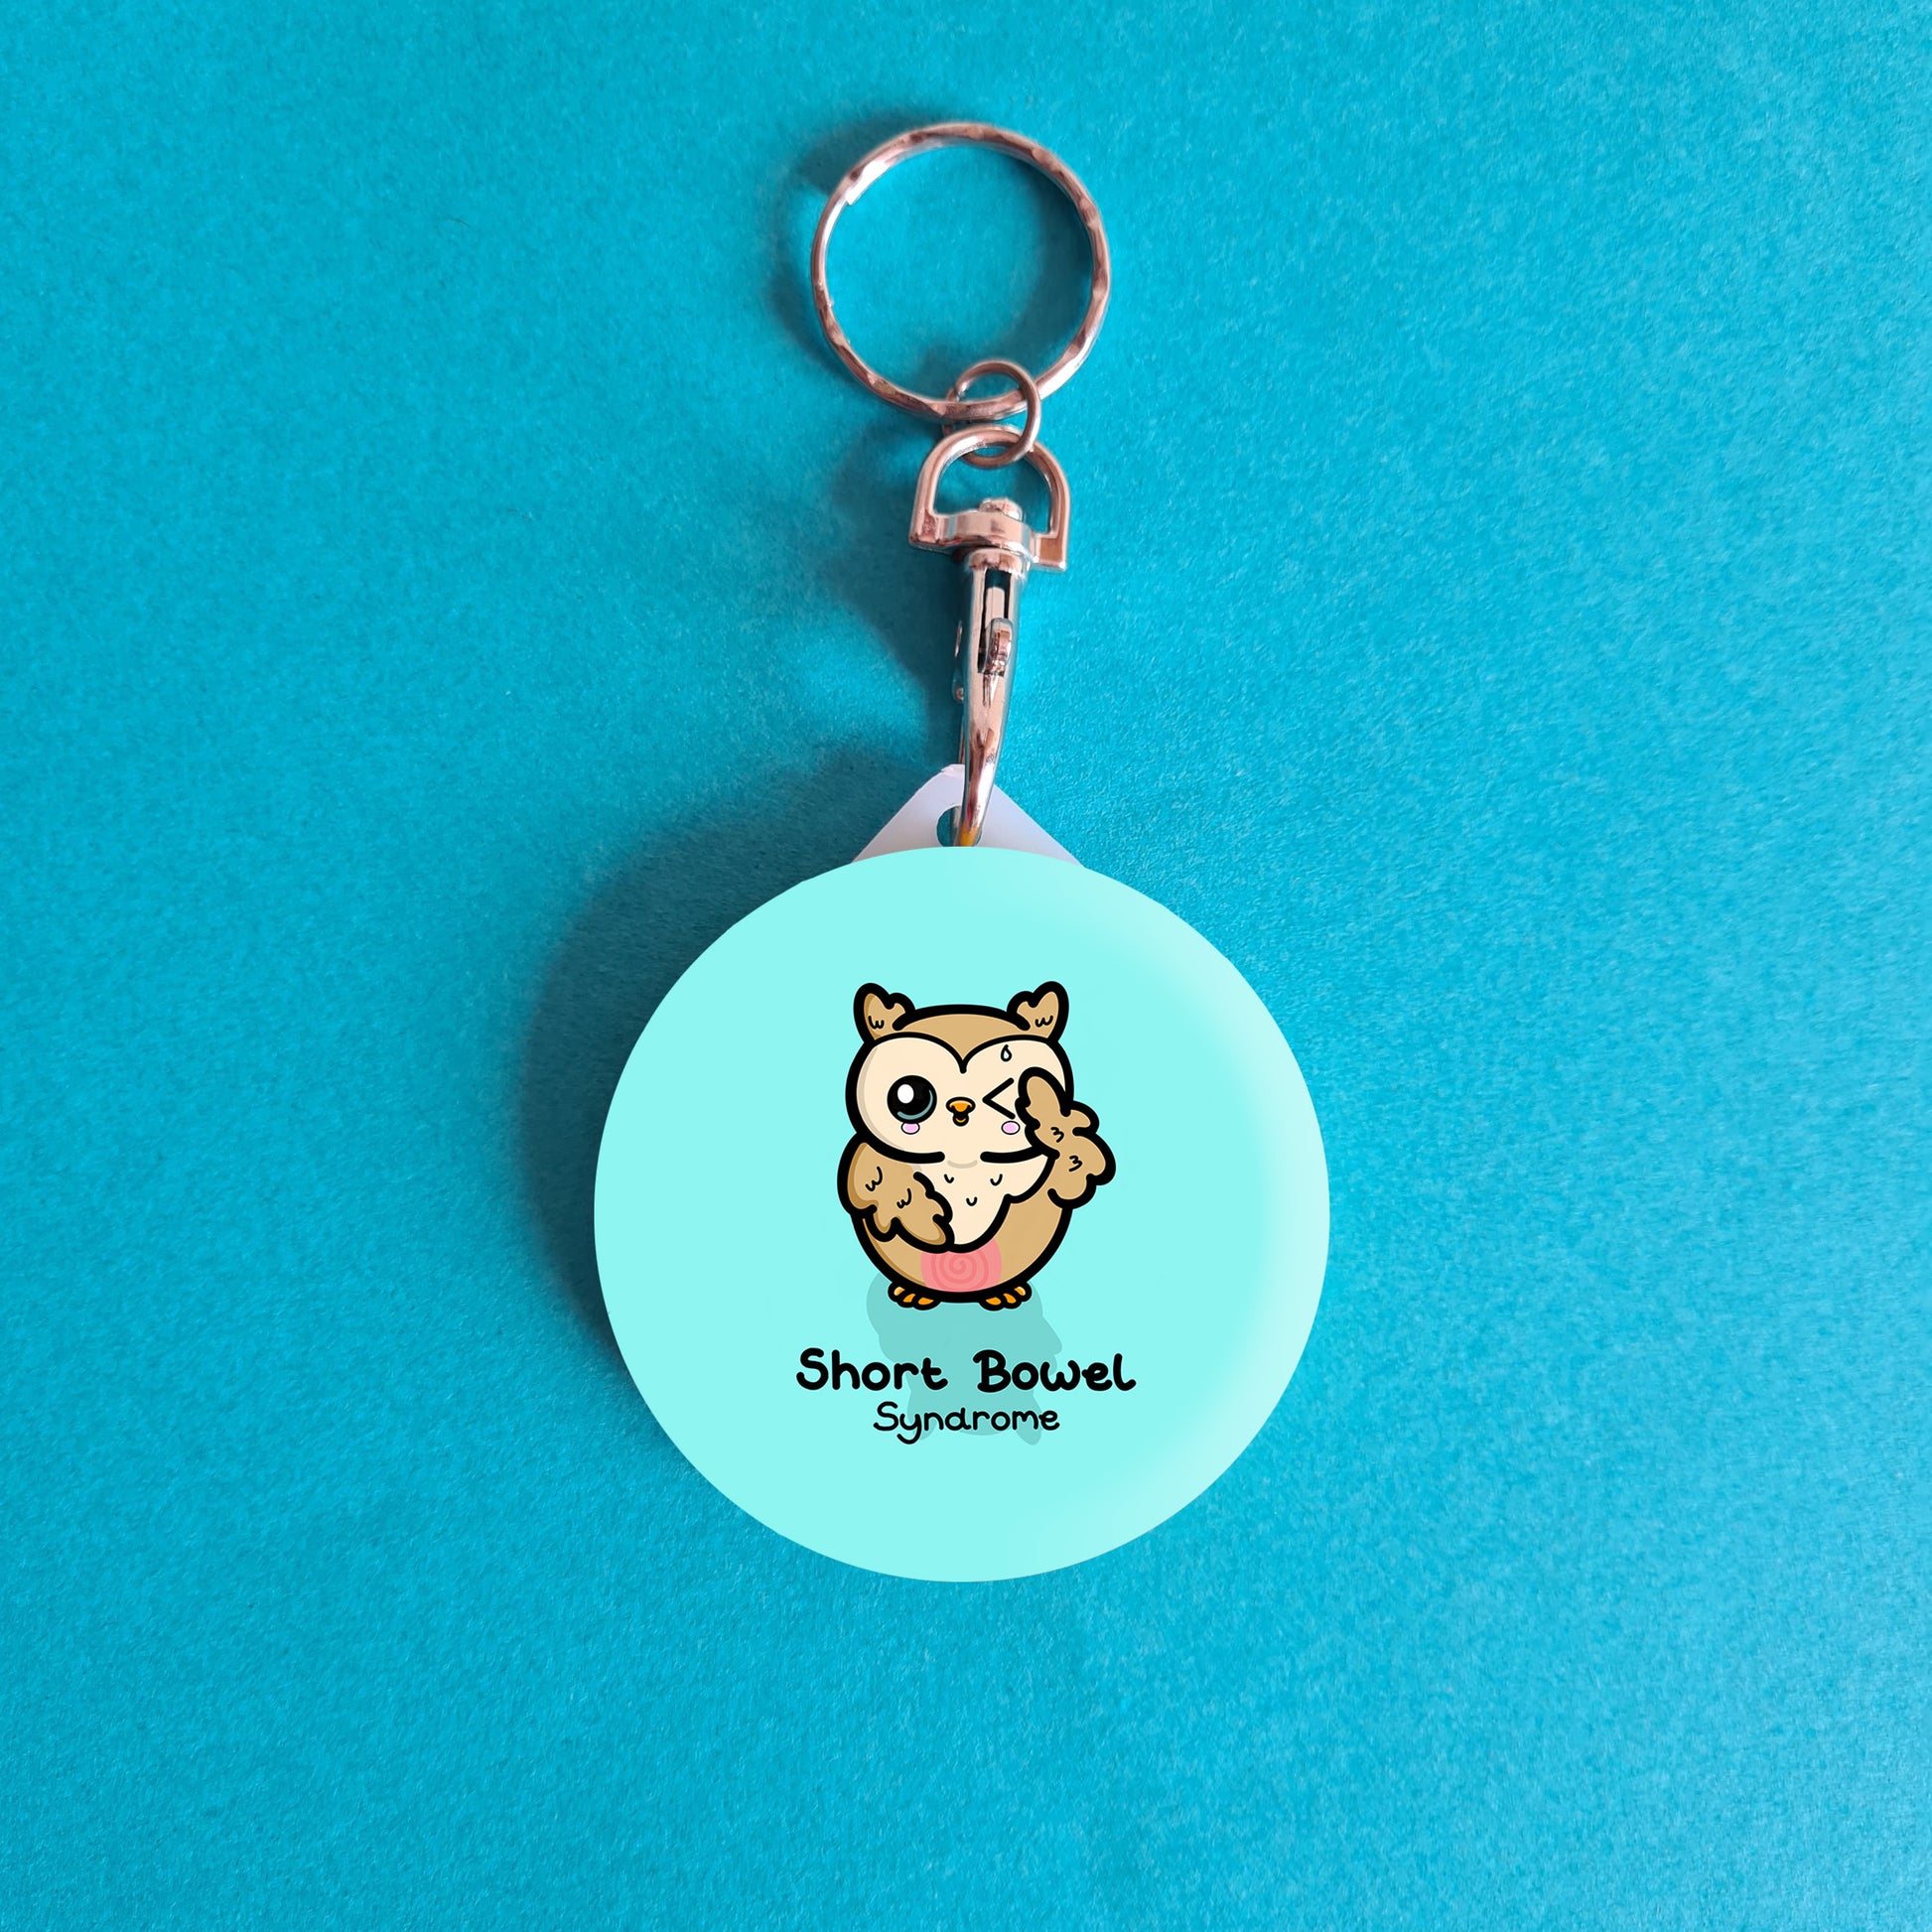 a light blue circle shaped keyring with a little cute brown owl with a red tummy and a sweat droplet coming from it's forehead with one eye closed. 'Short Bowel Syndrome' is written underneath the owl. The background of the photo is blue